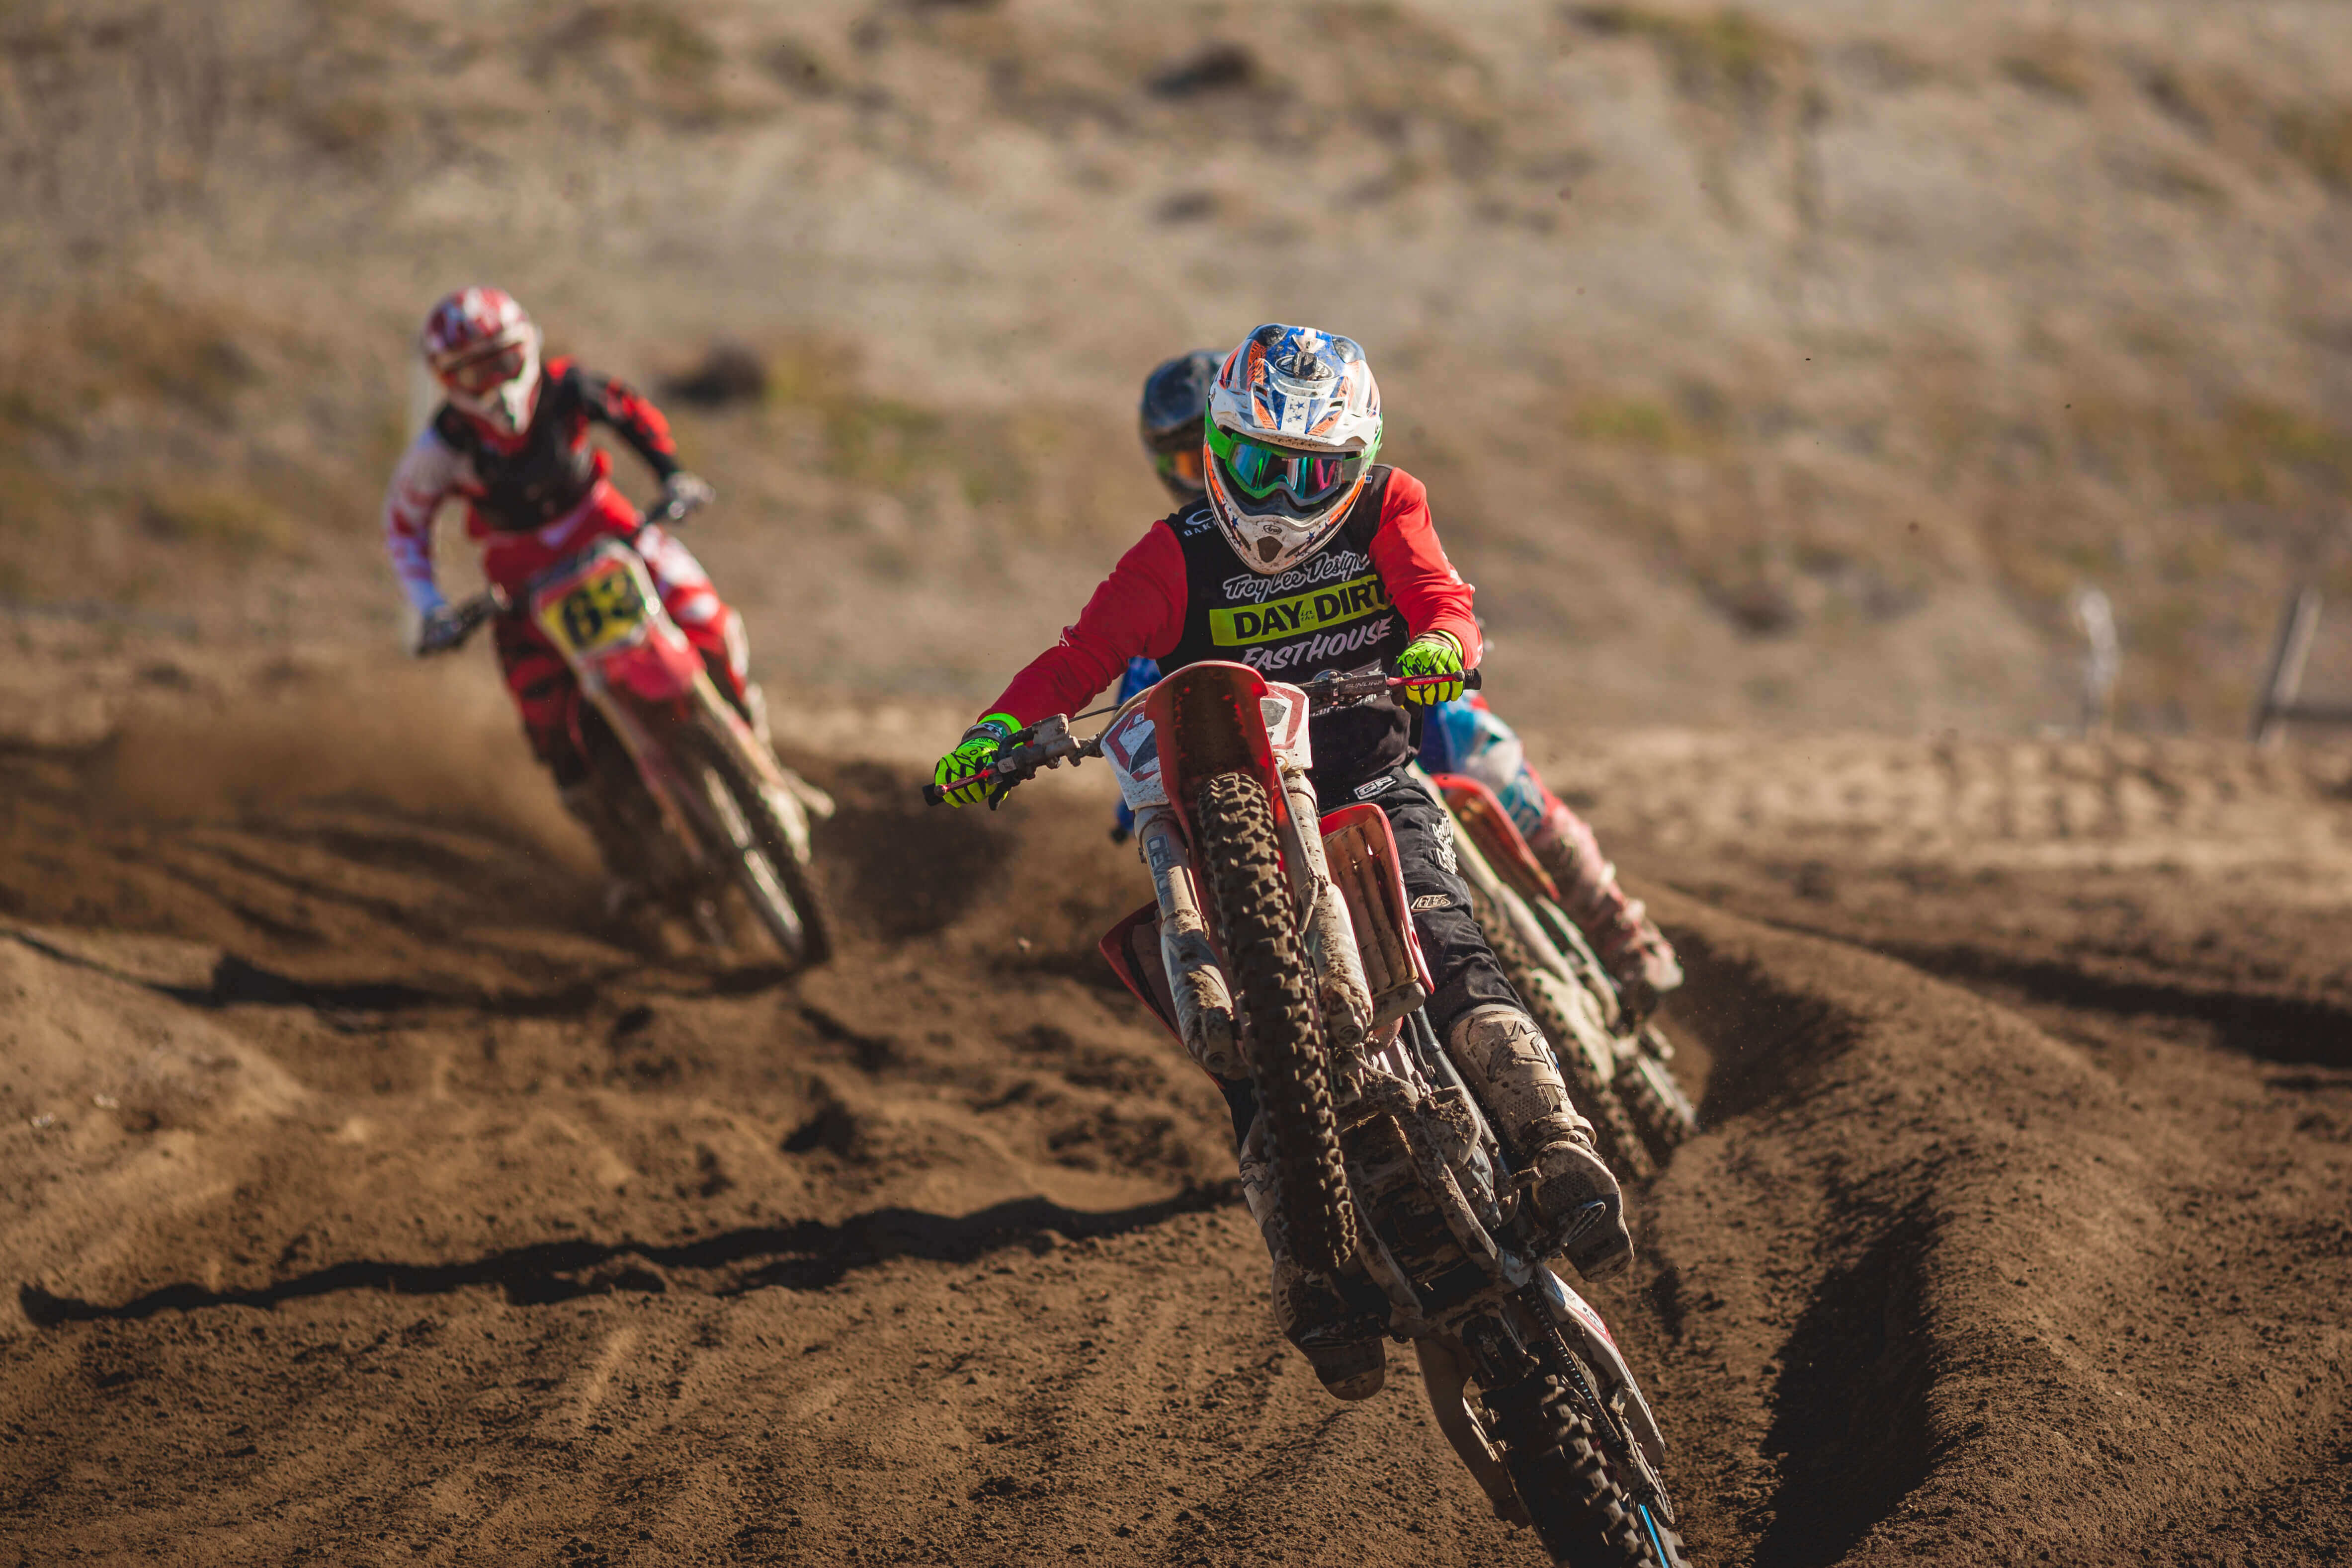 entry level salary for professional dirt bike racers